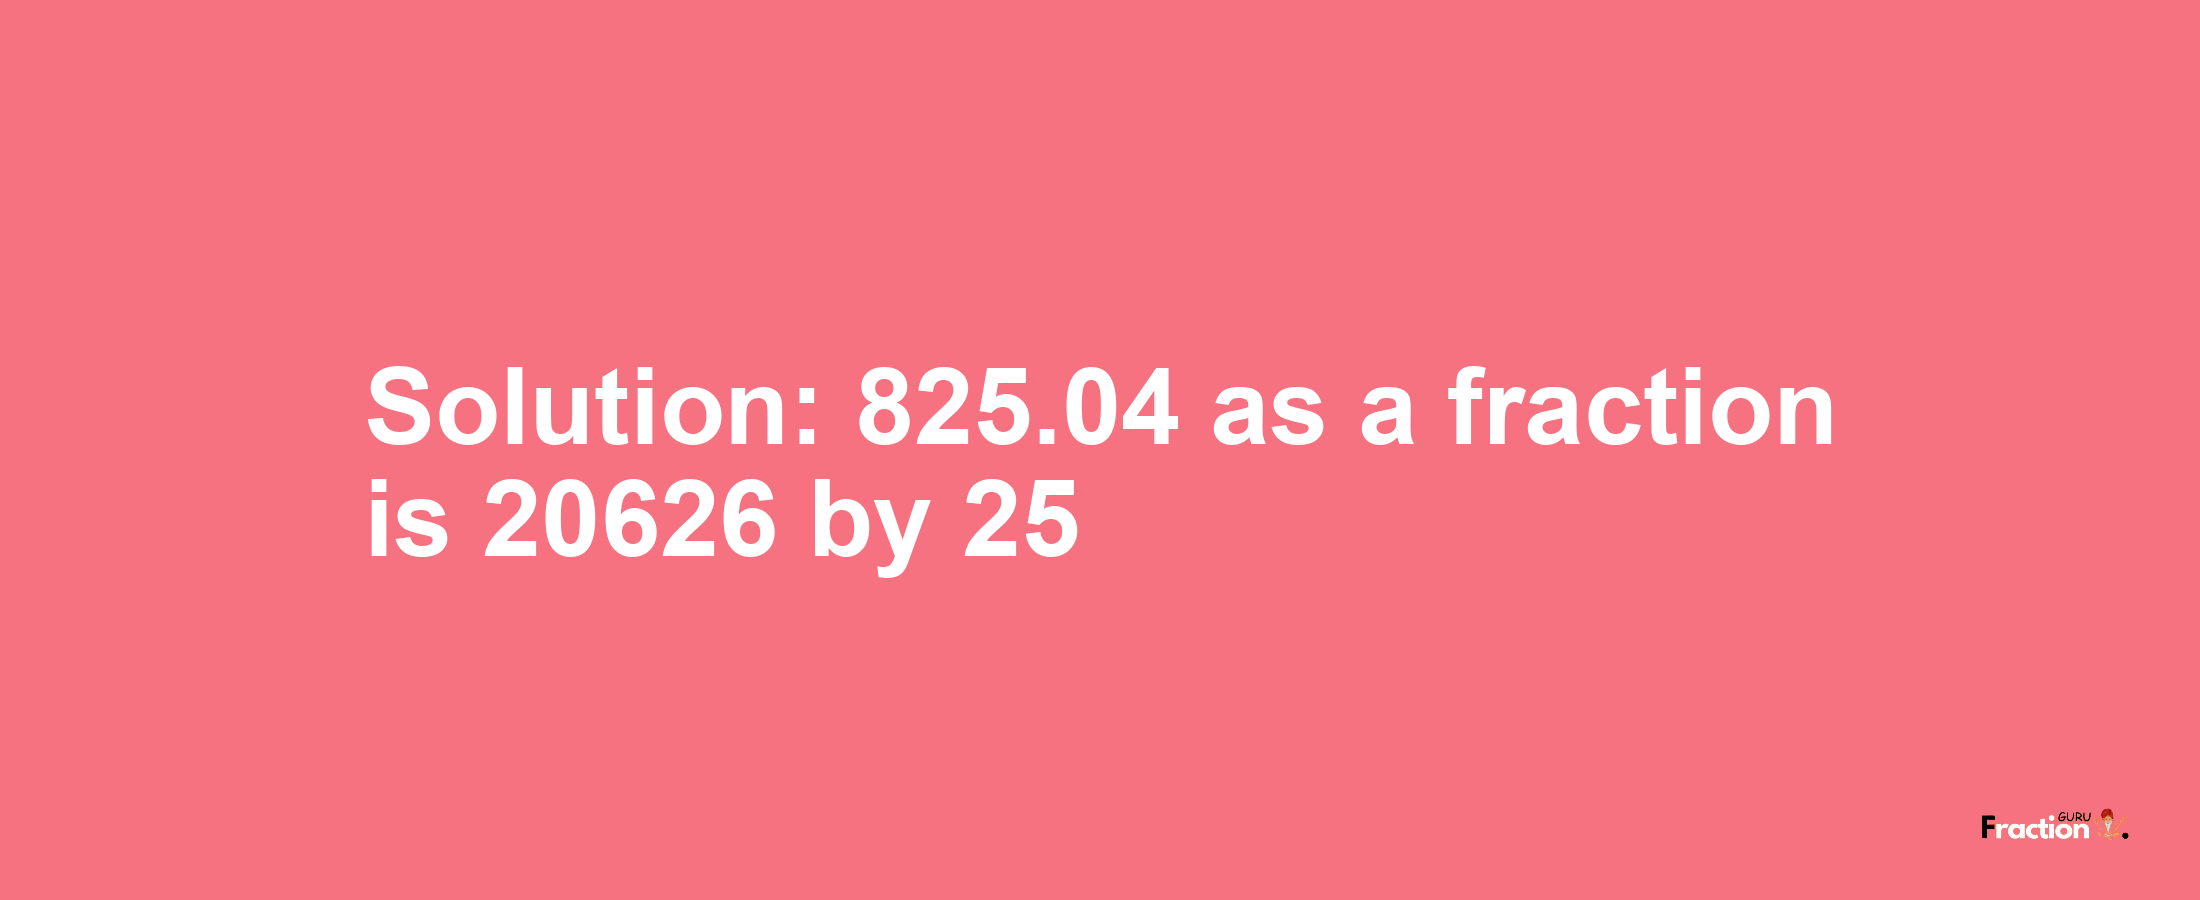 Solution:825.04 as a fraction is 20626/25